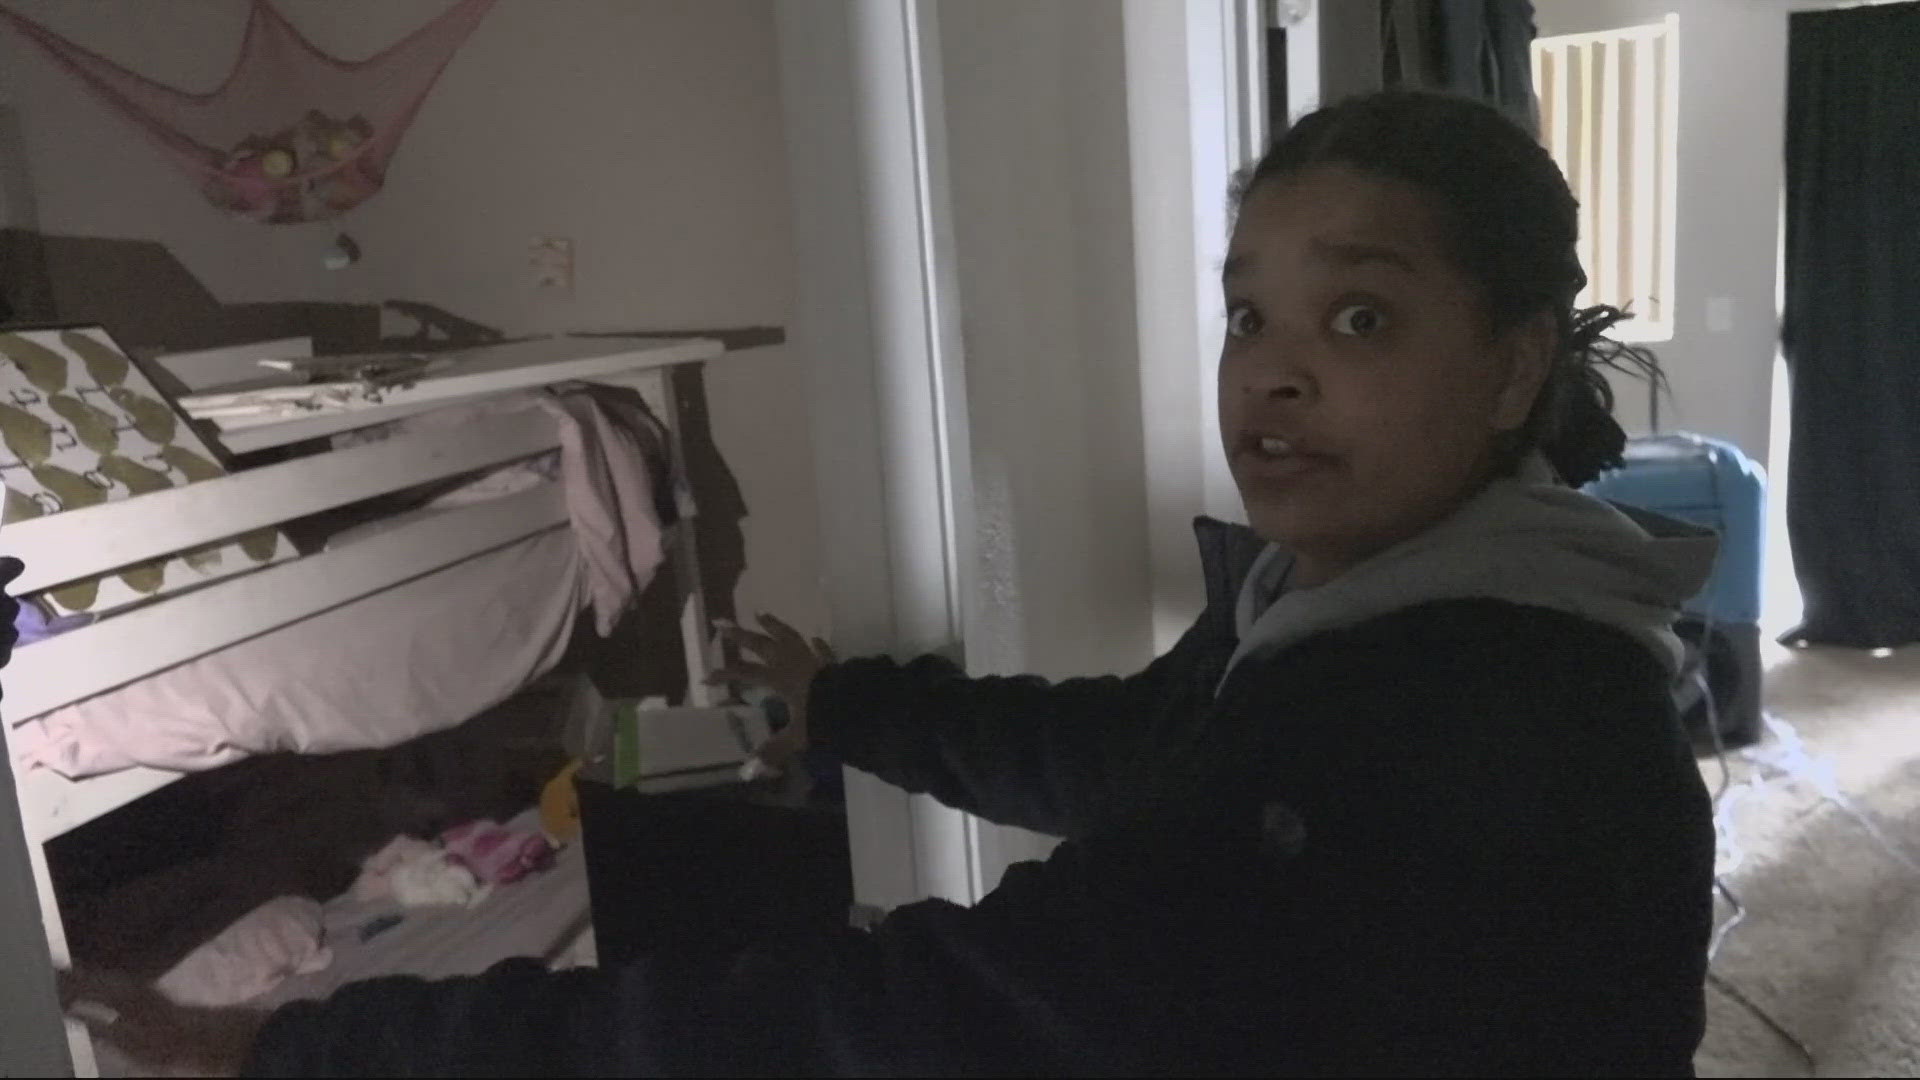 A family in Vancouver has been forced out of their apartment after a teen driver smashed through their seven-year-old daughter’s room — narrowly missing her.